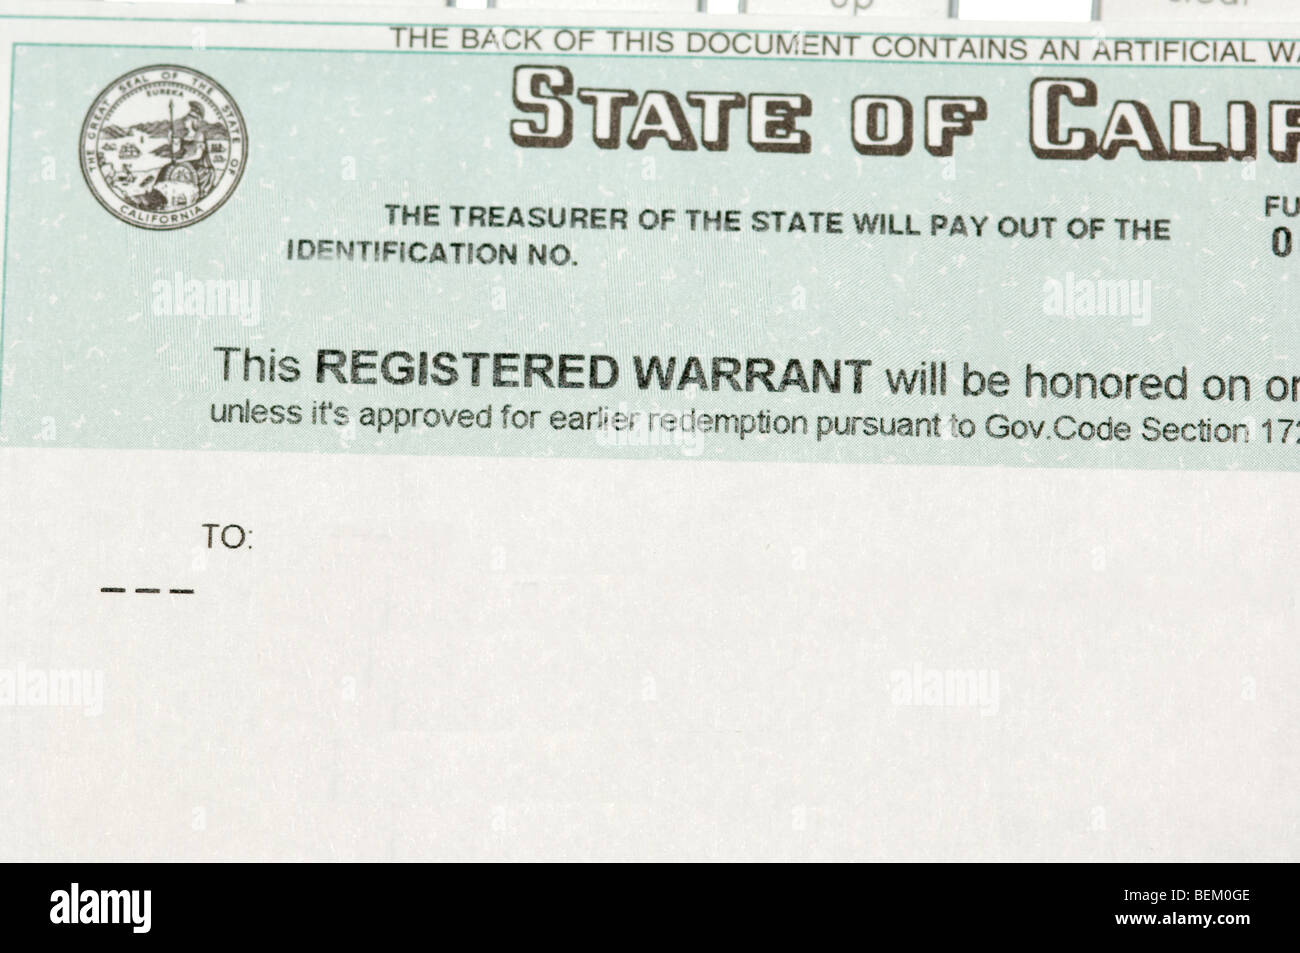 Cash-strapped California issues 'registered warrant' also known as an IOU instead of checks that recipients can cash. Stock Photo